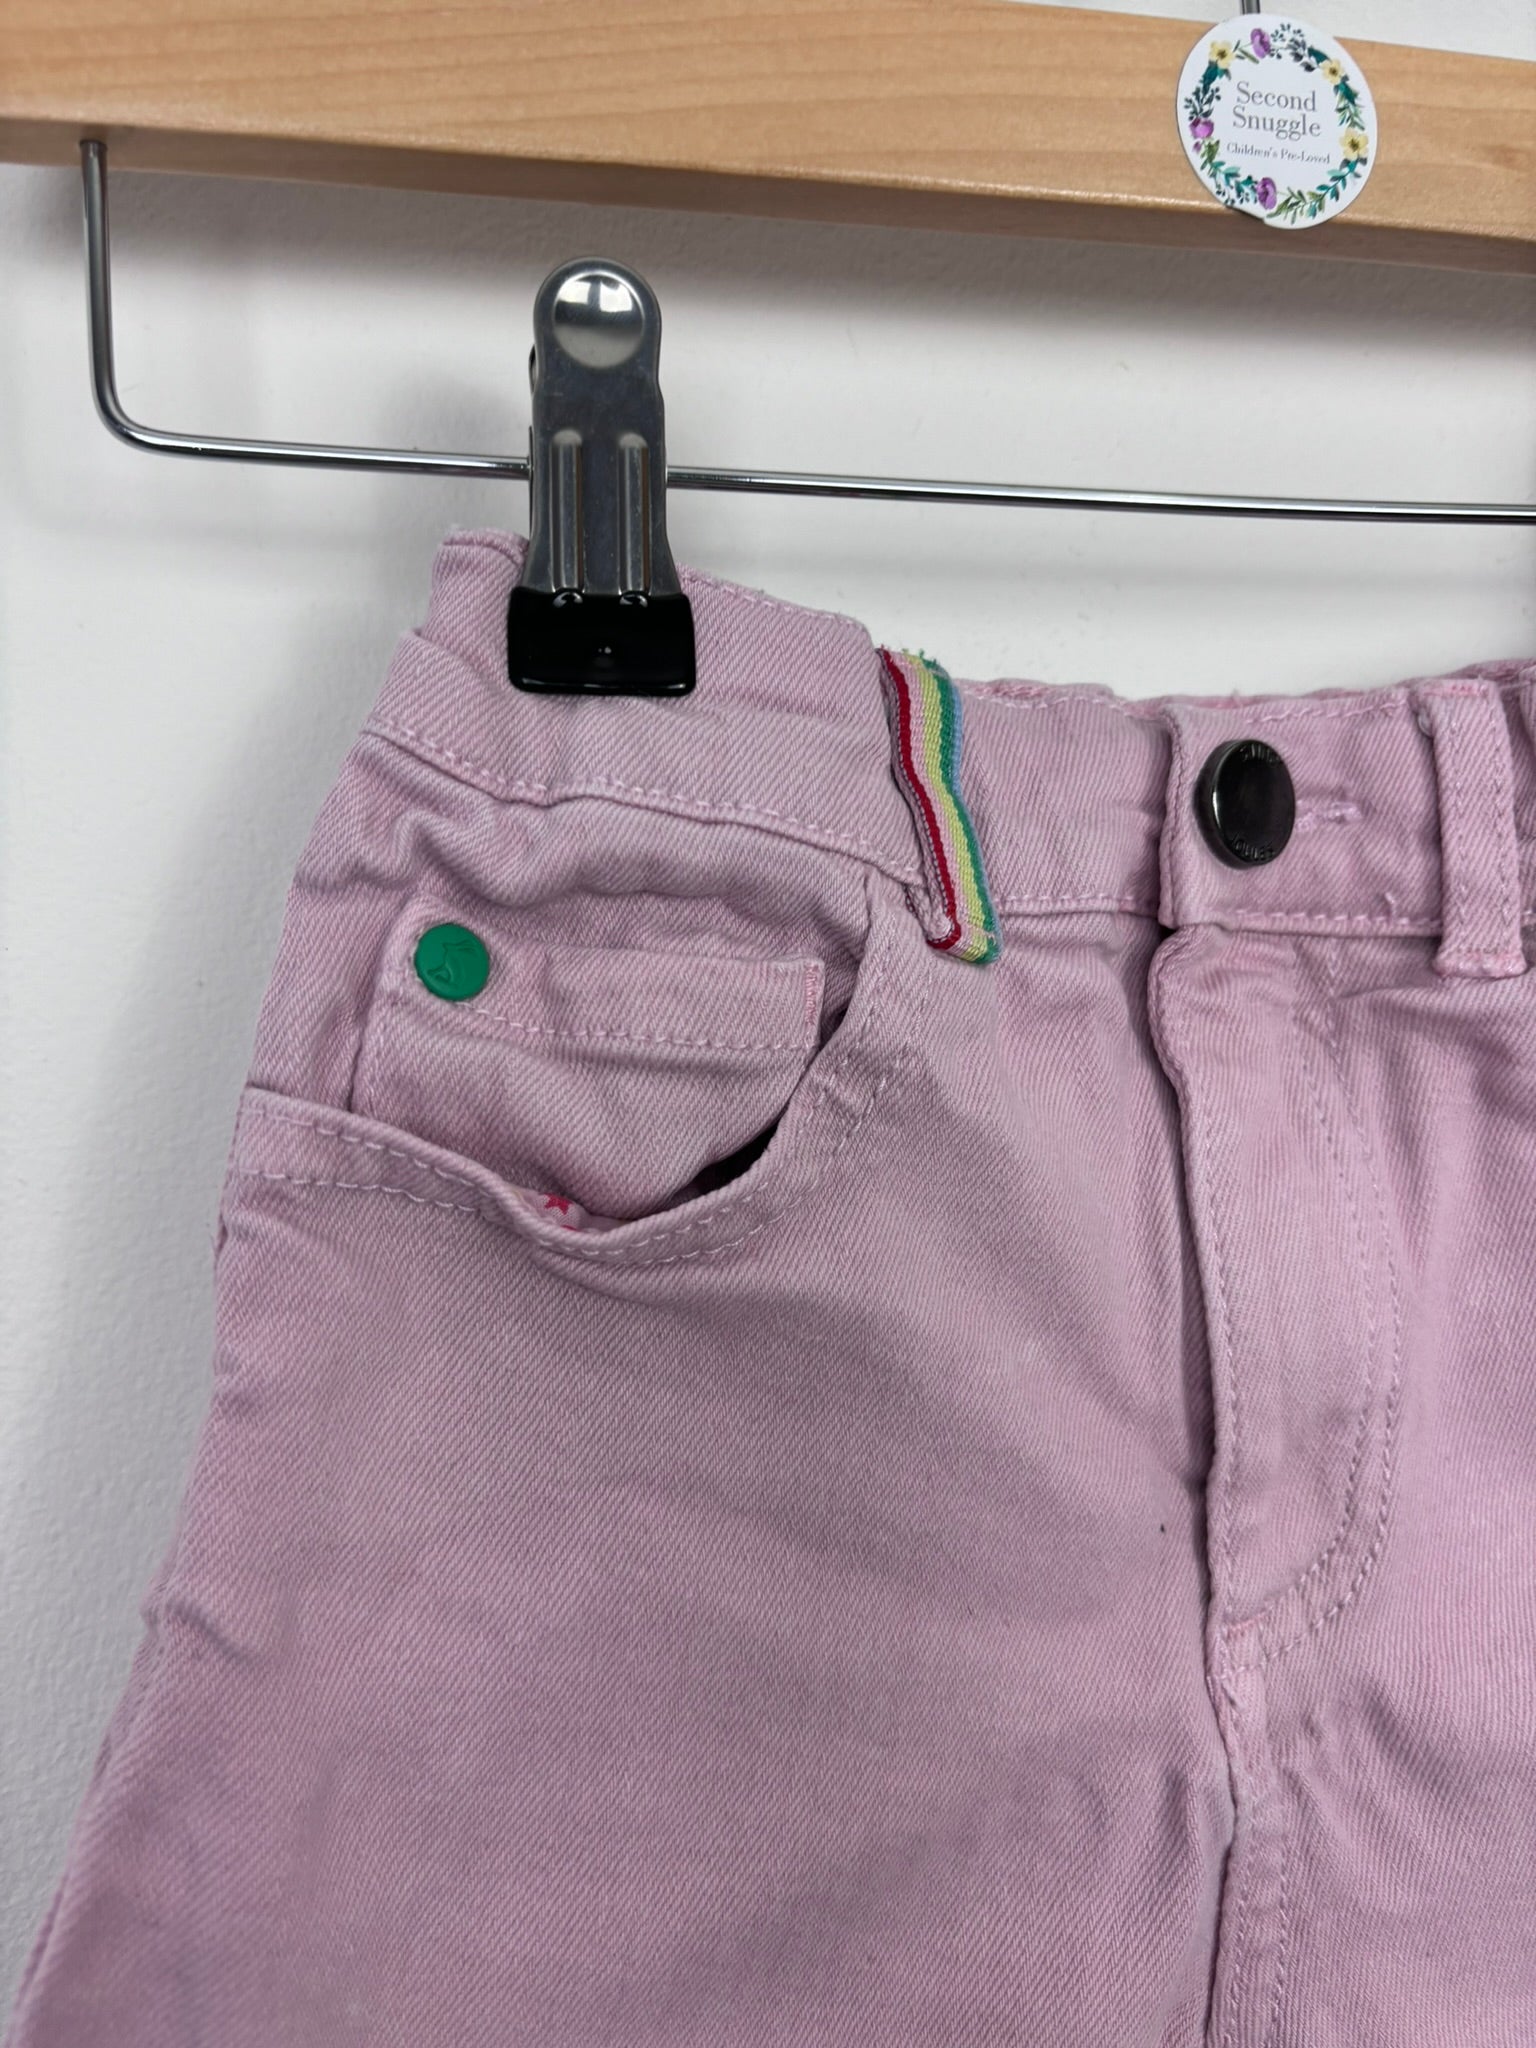 Joules 6 Years-Shorts-Second Snuggle Preloved